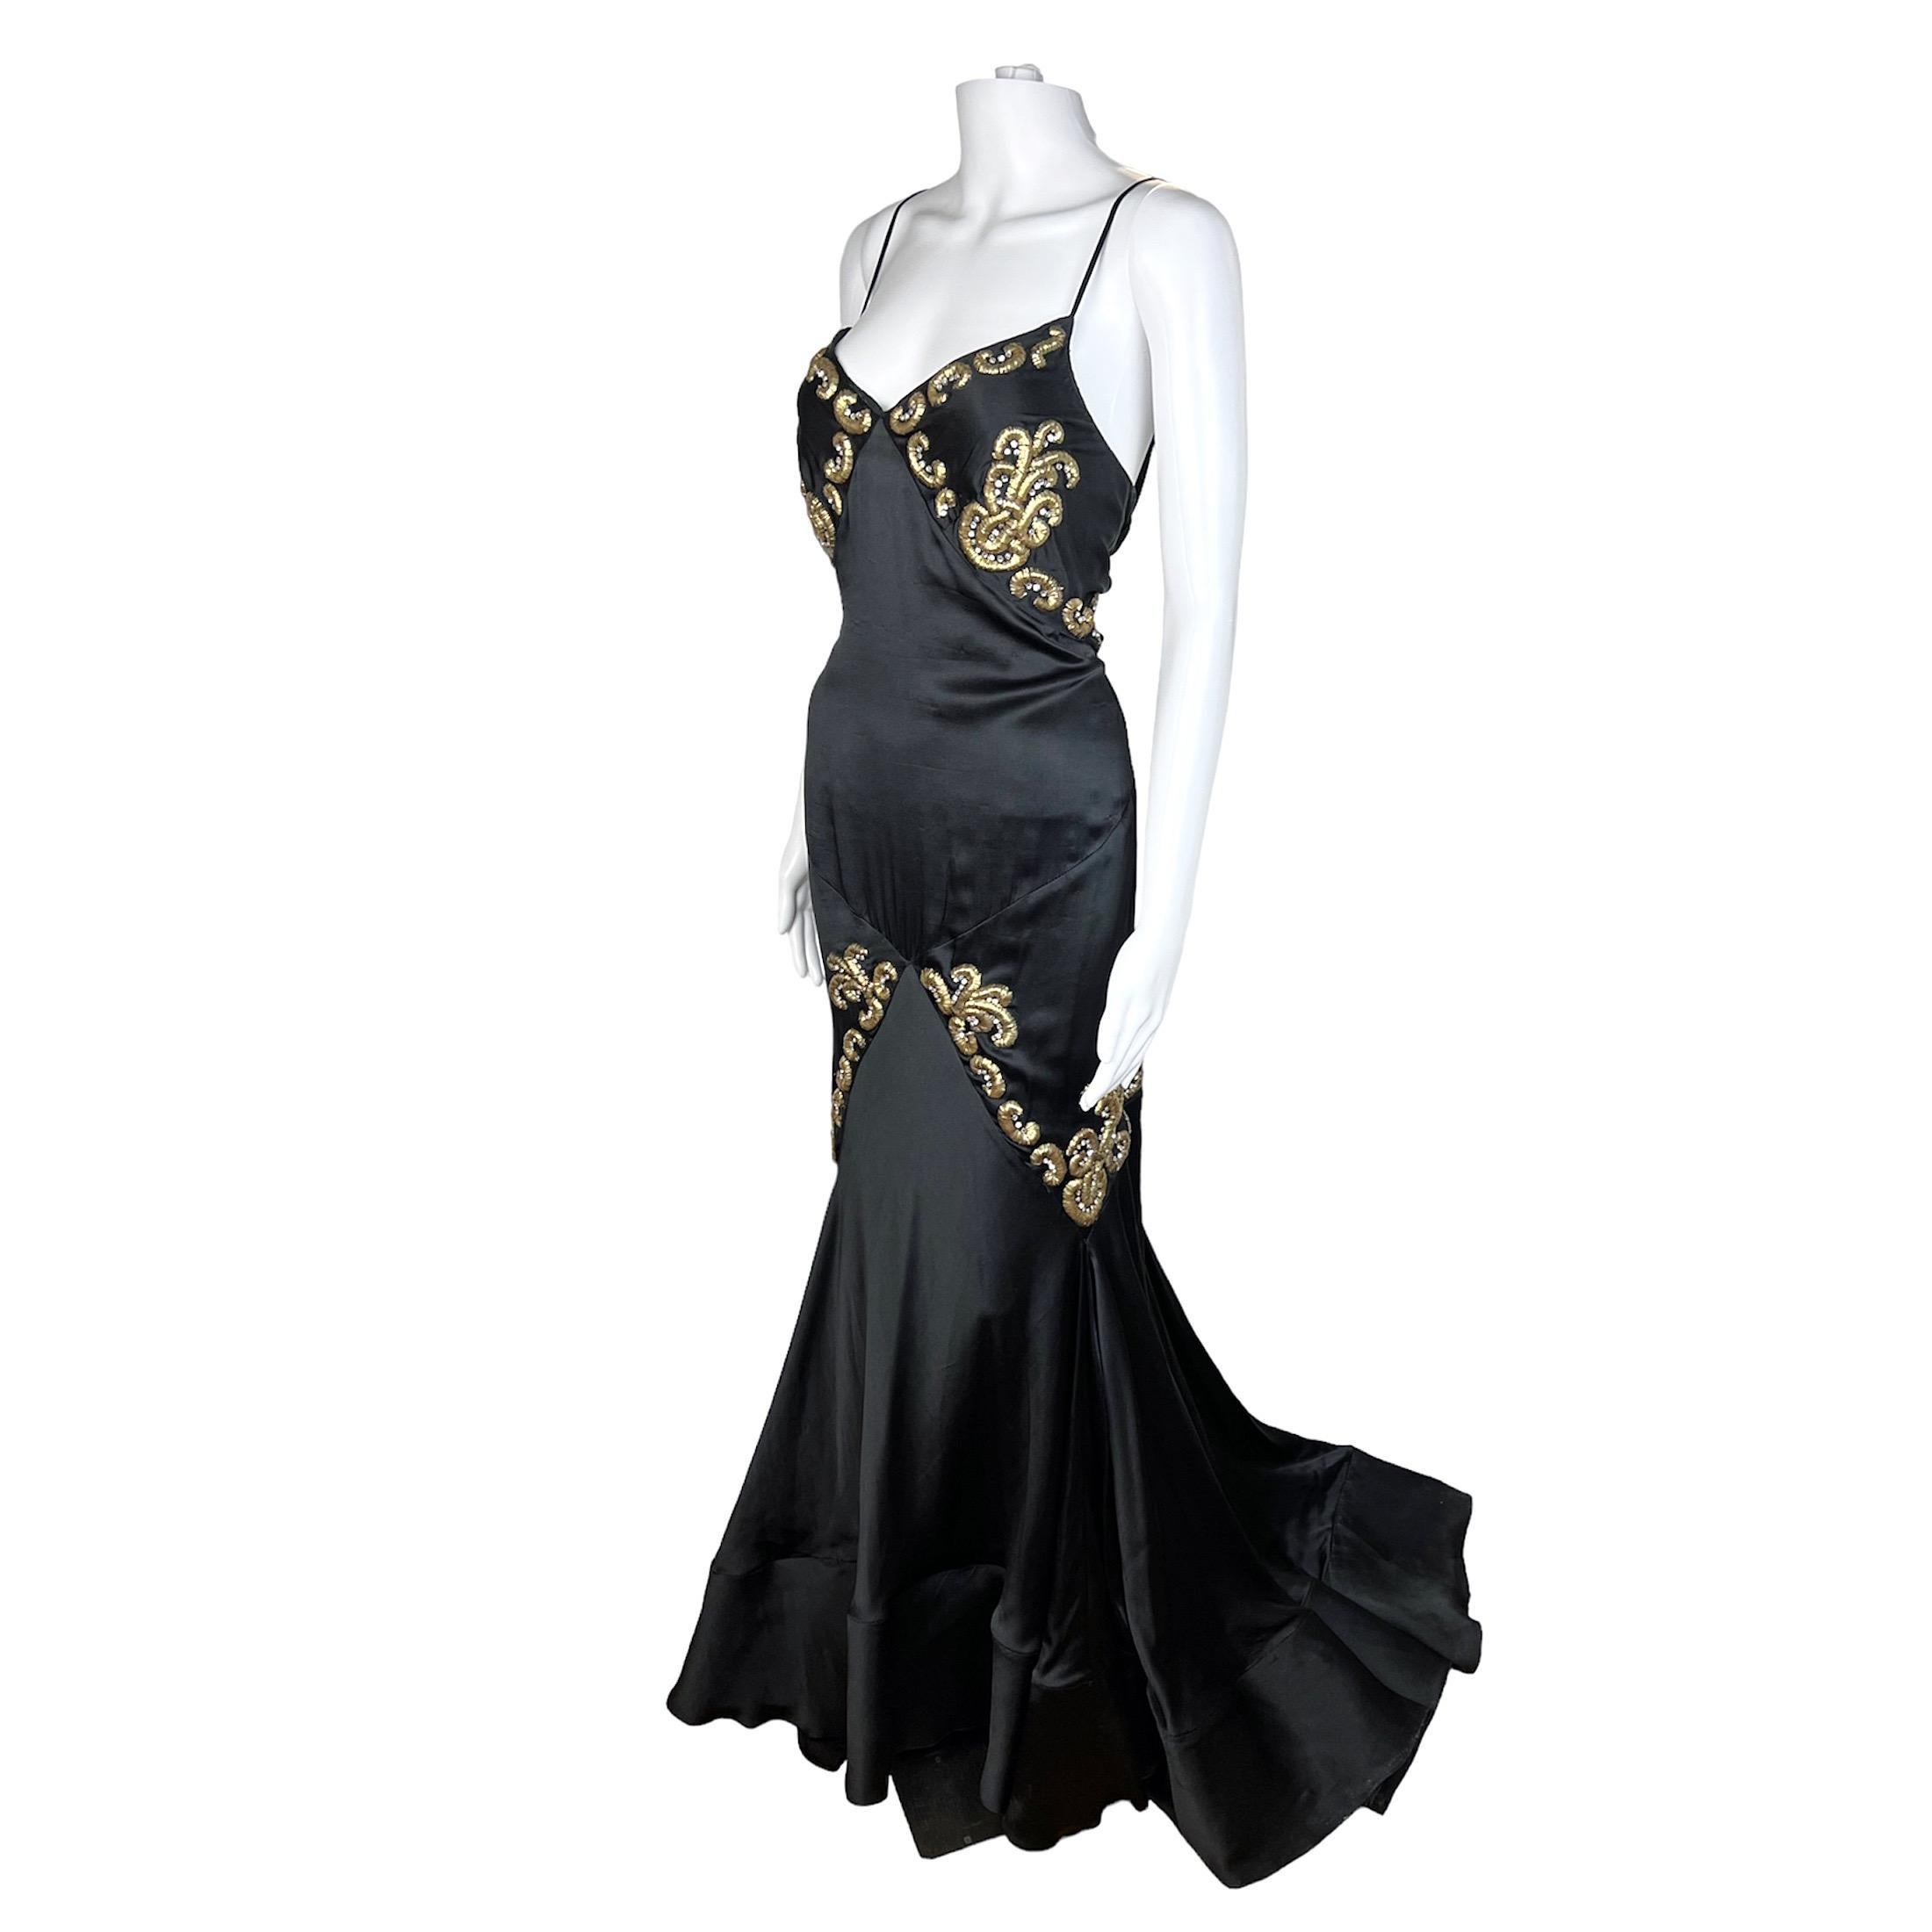 Incredible Roberto Cavalli black gown with a train and metal and crystals embellishment on front and back of bodice and silhouette from 2004. This gown is a show stopper. The hemline is lined with tulle panels giving the dress a very dramatic effect